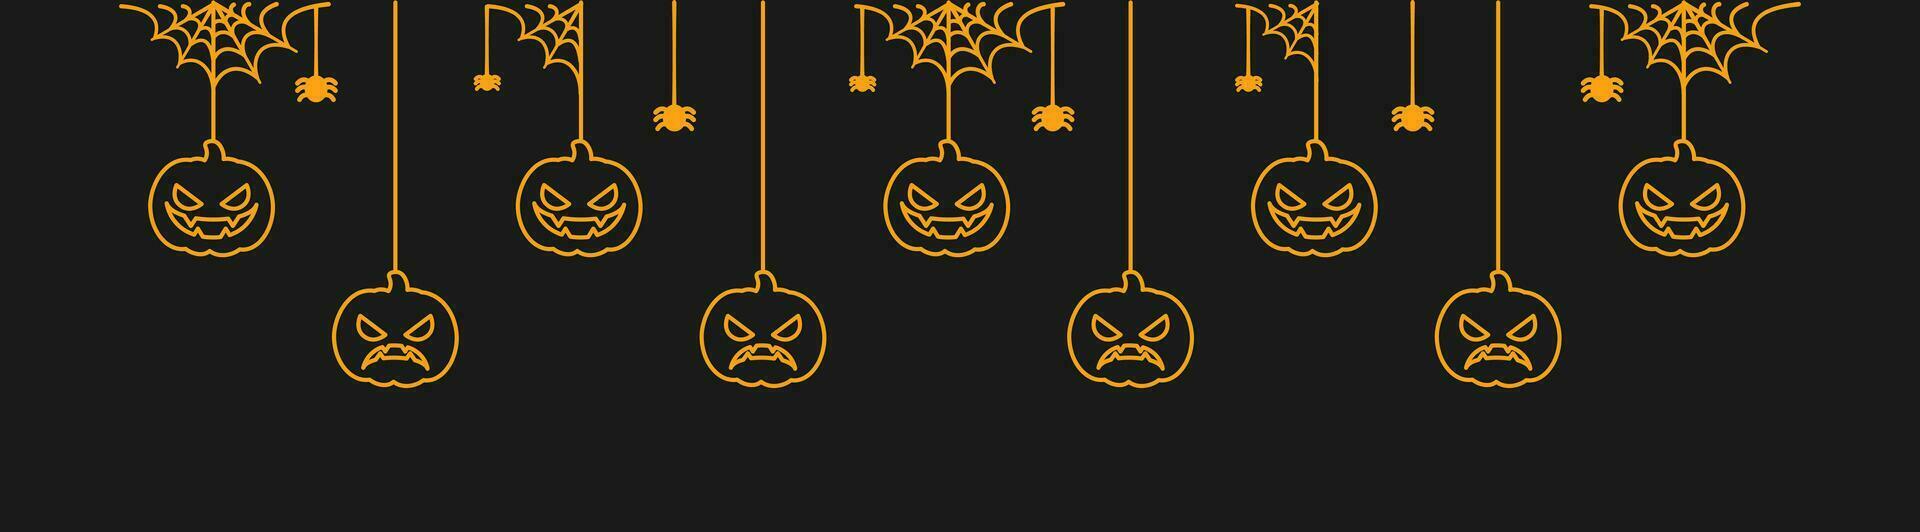 Happy Halloween banner or border with glowing jack o lantern pumpkins. Hanging Spooky Ornaments Decoration Vector illustration, trick or treat party invitation